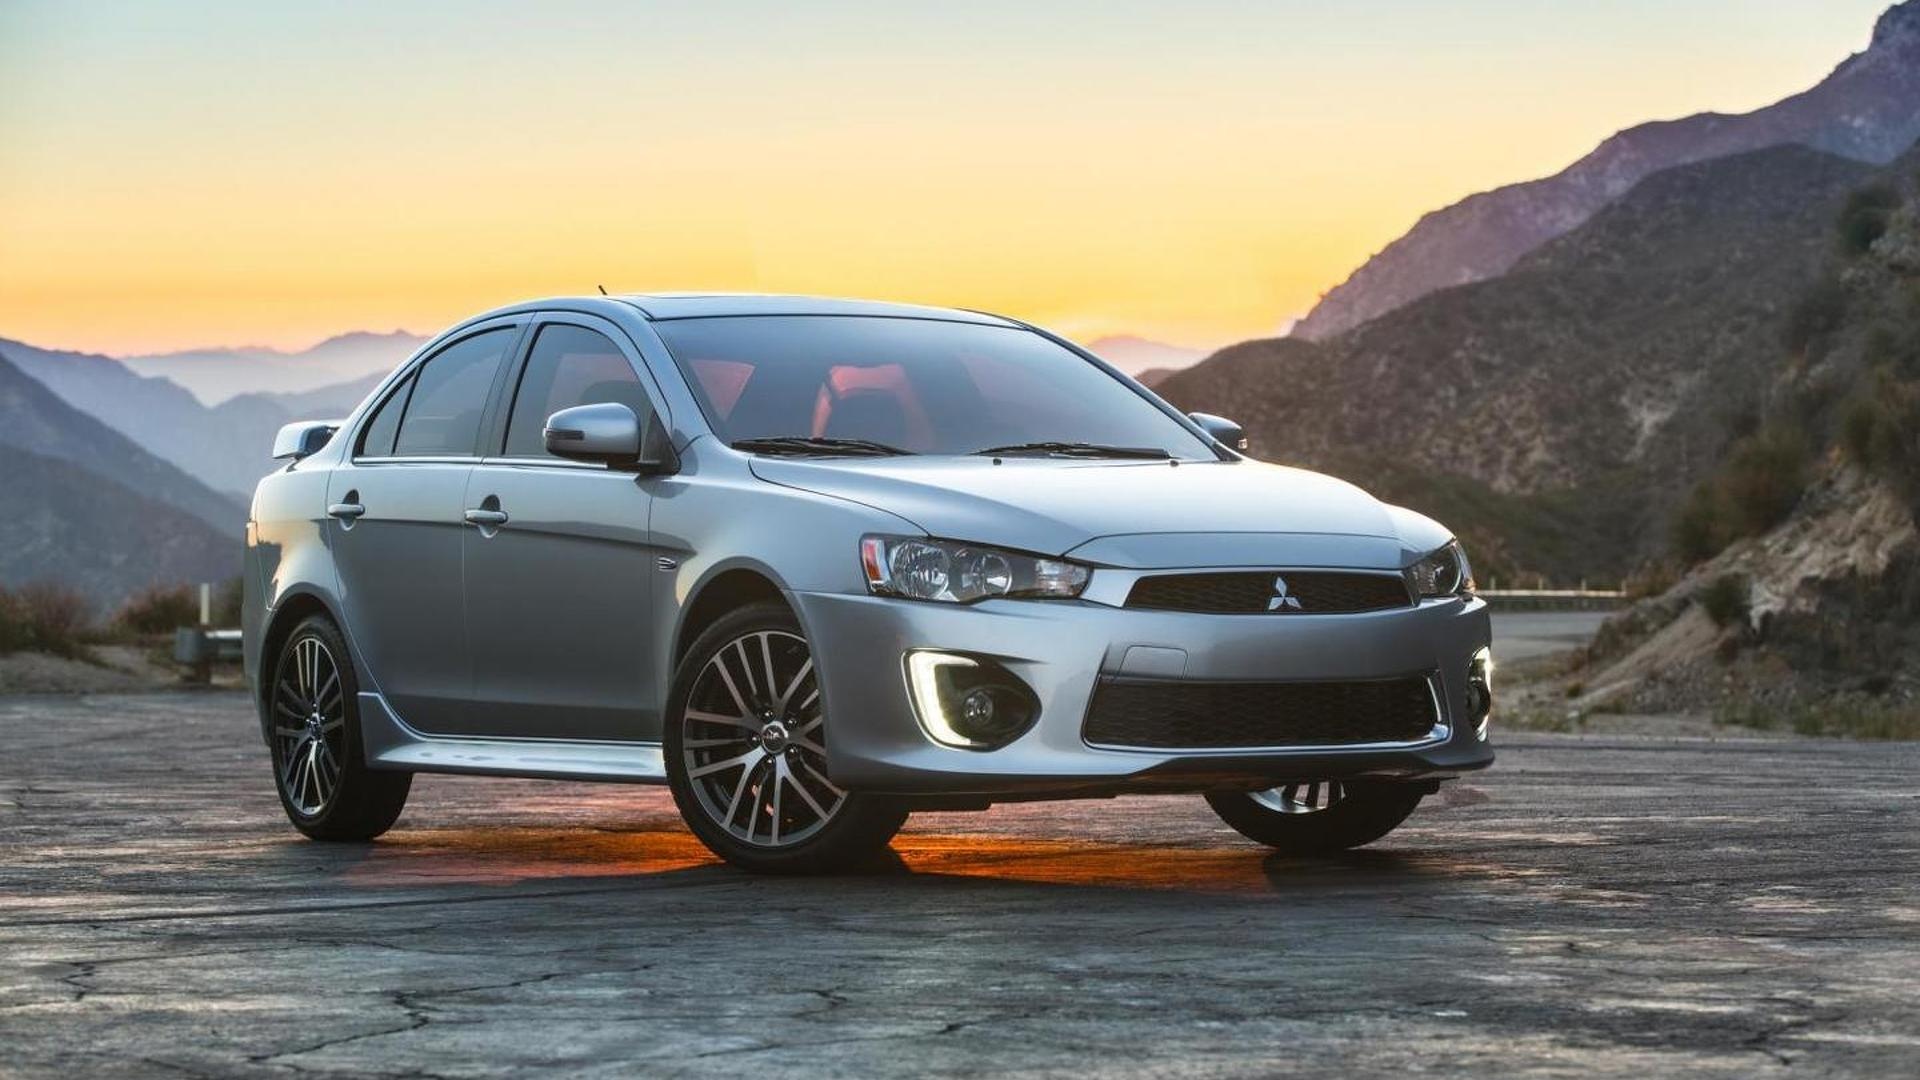 Mitsubishi Lancer, Reliable and sporty, Driving enthusiasts' choice, Testimonials, 1920x1080 Full HD Desktop